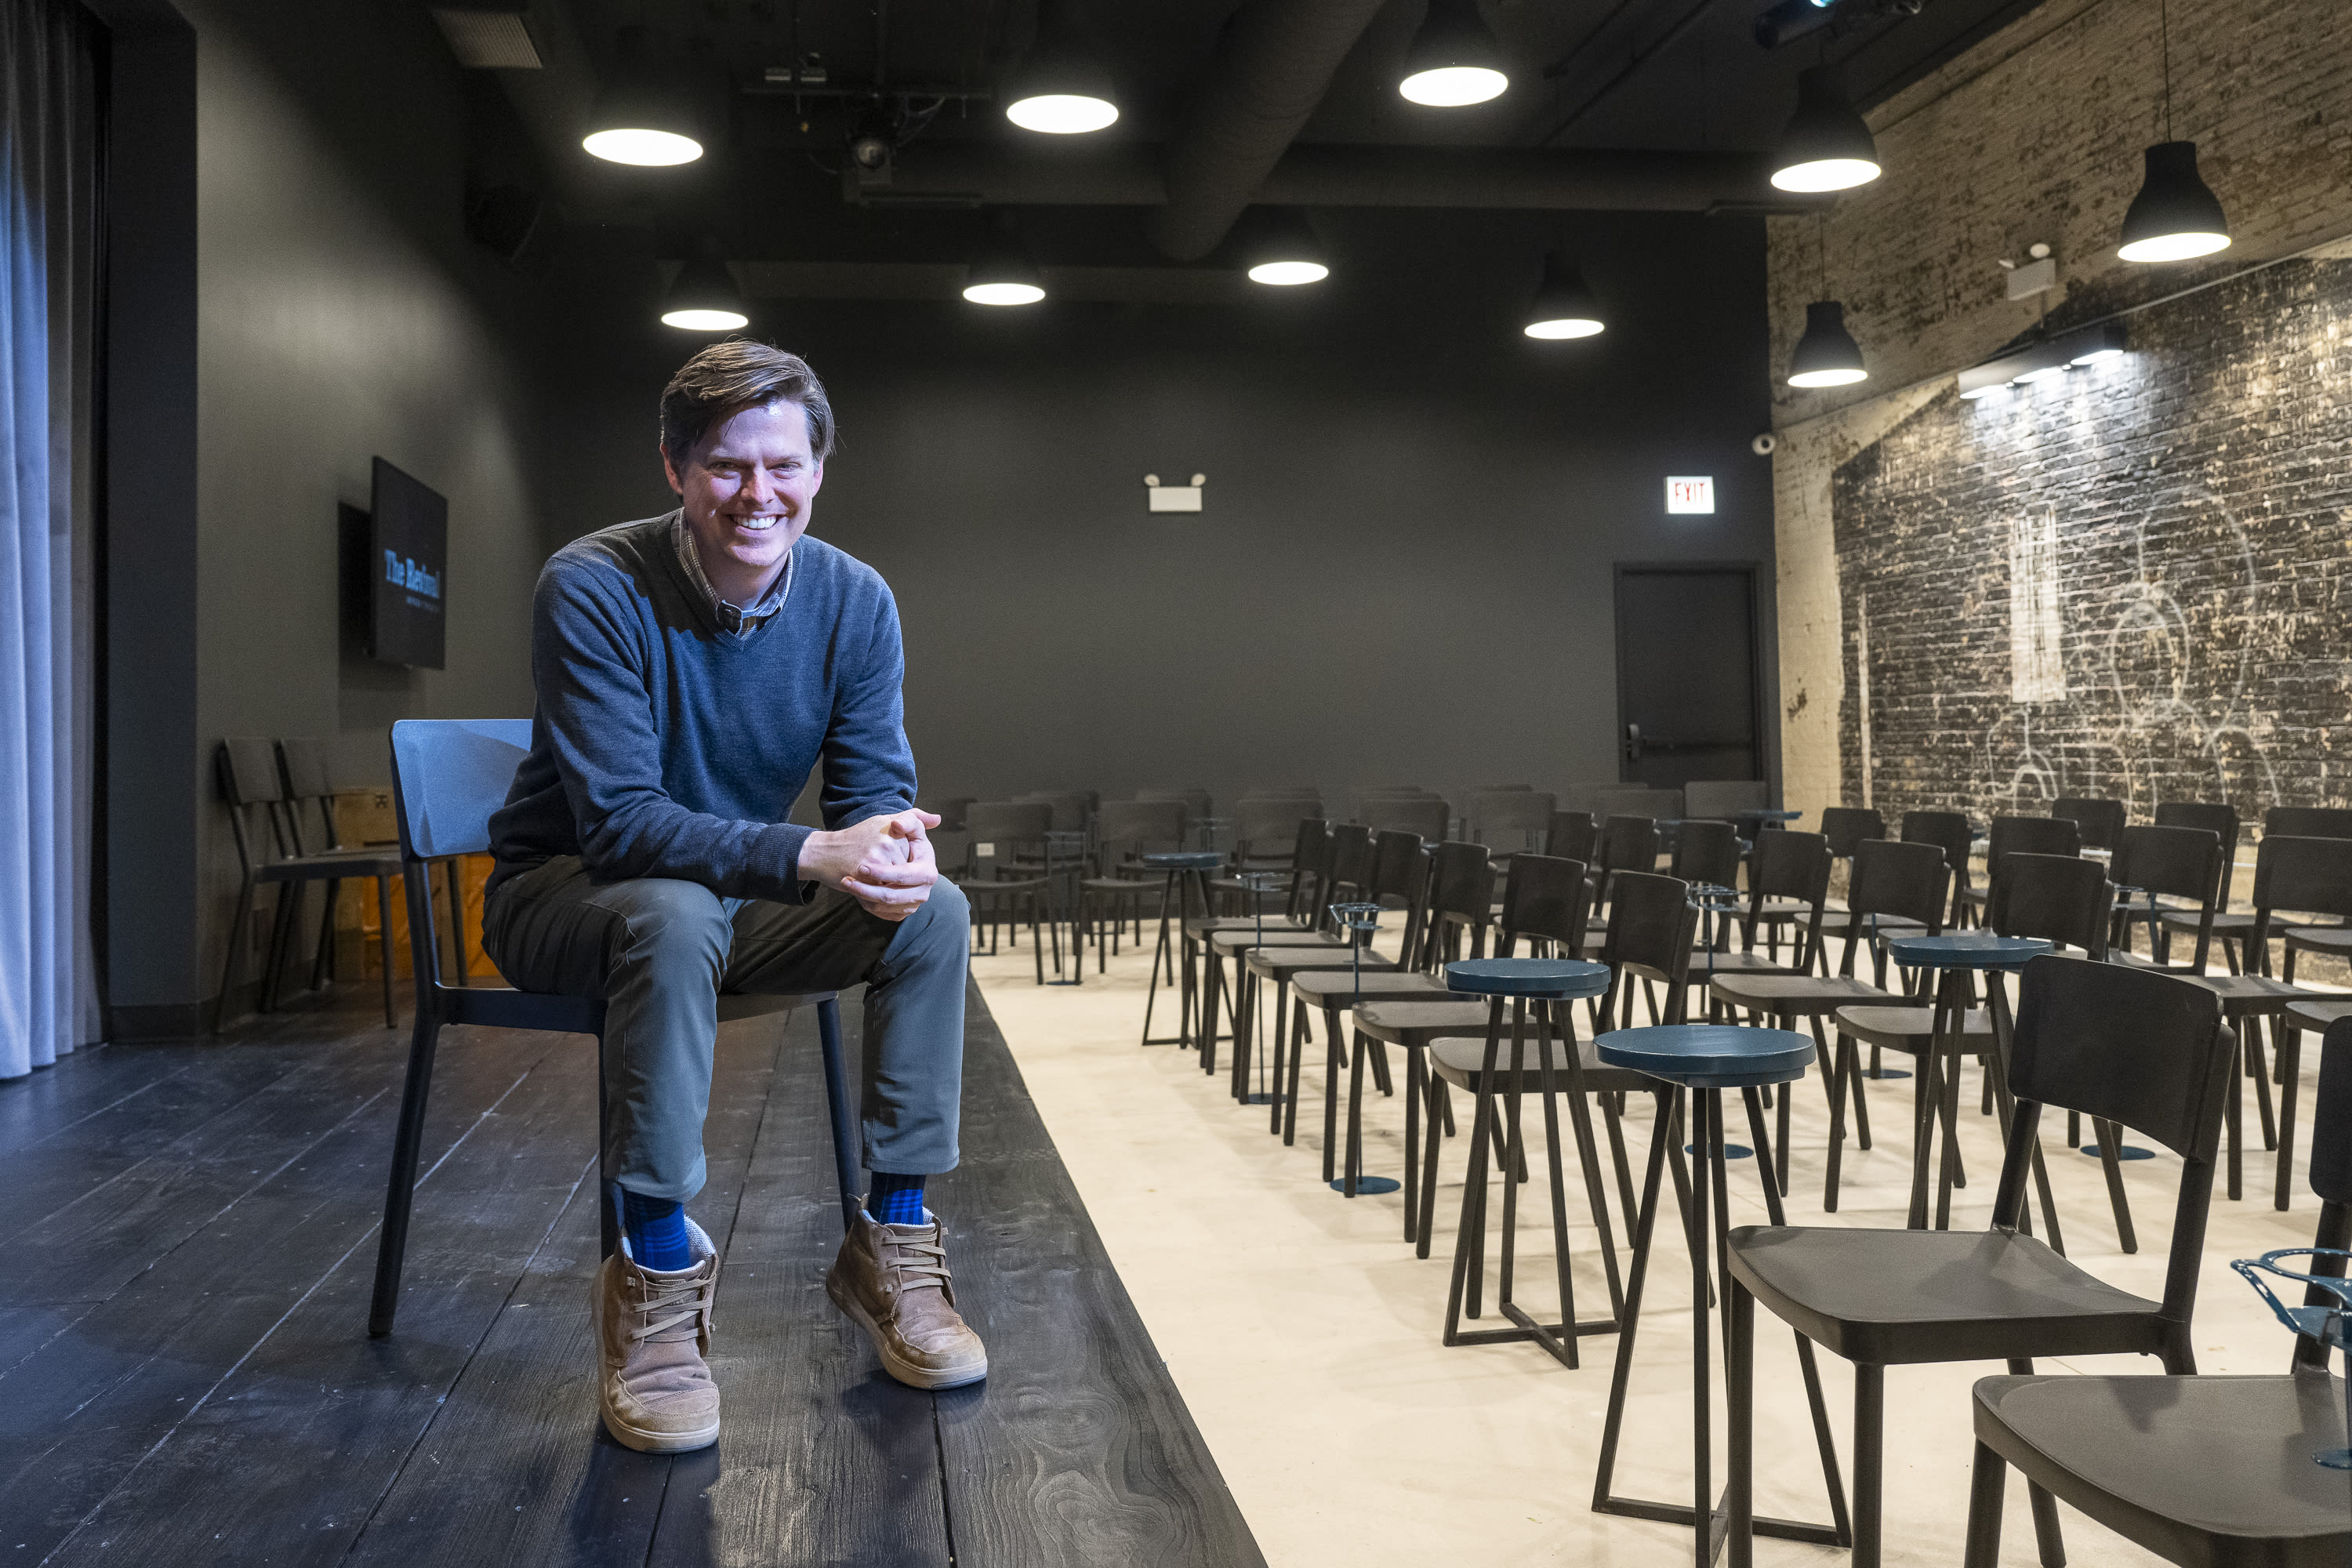 Chicago improv scene grows with new theaters in South Loop, Lake View